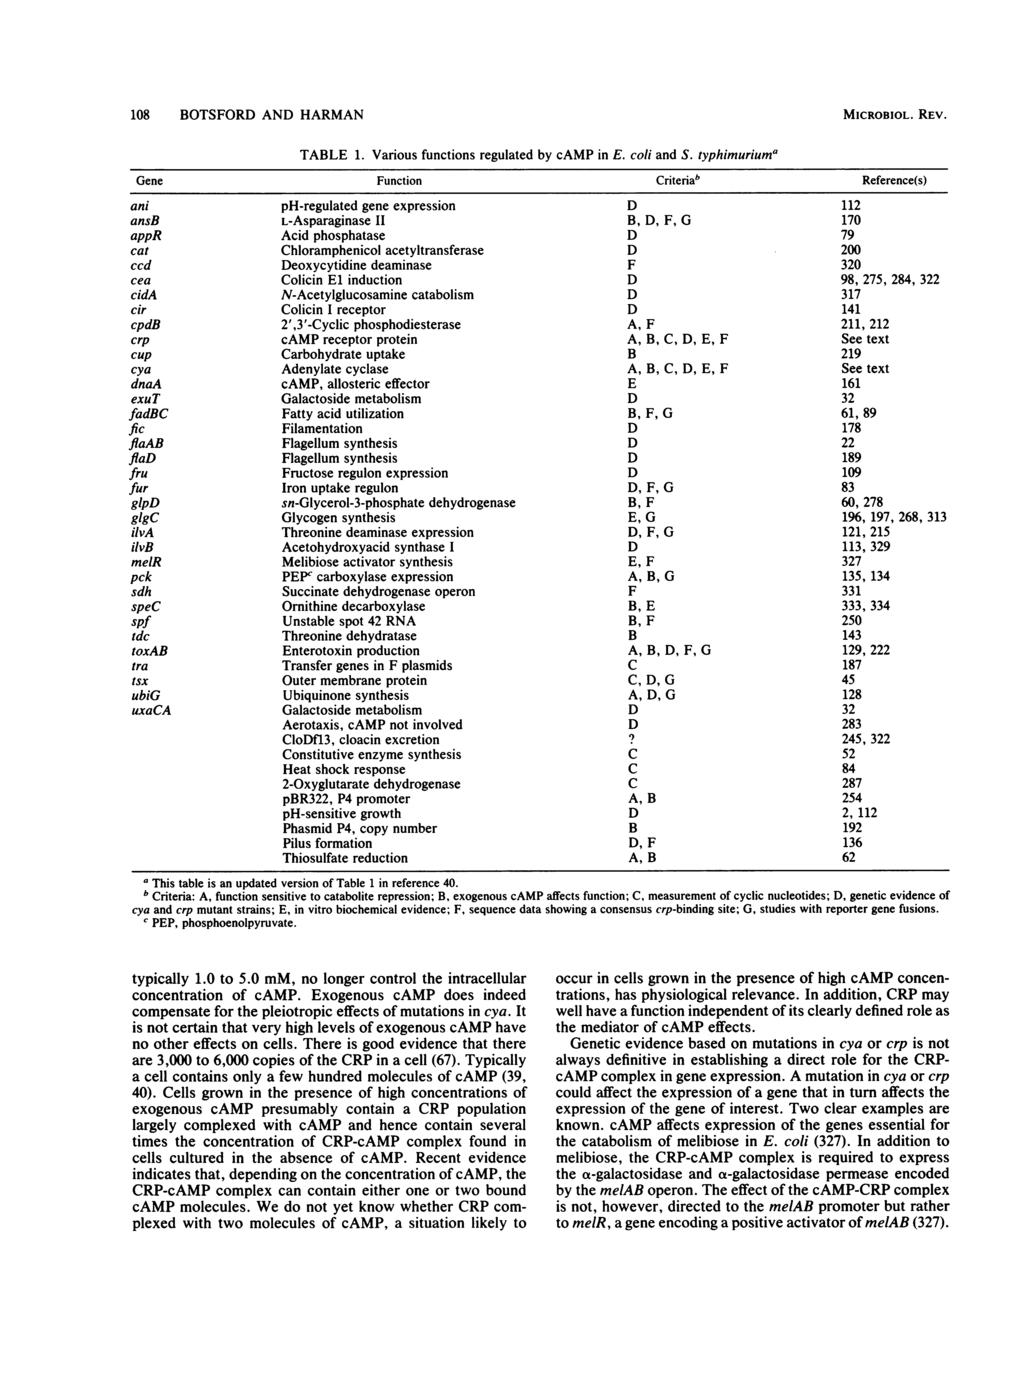 108 BOTSFOR AN HARMAN MICROBIOL. REV. TABLE 1. Various functions regulated by camp in E. coli and S.